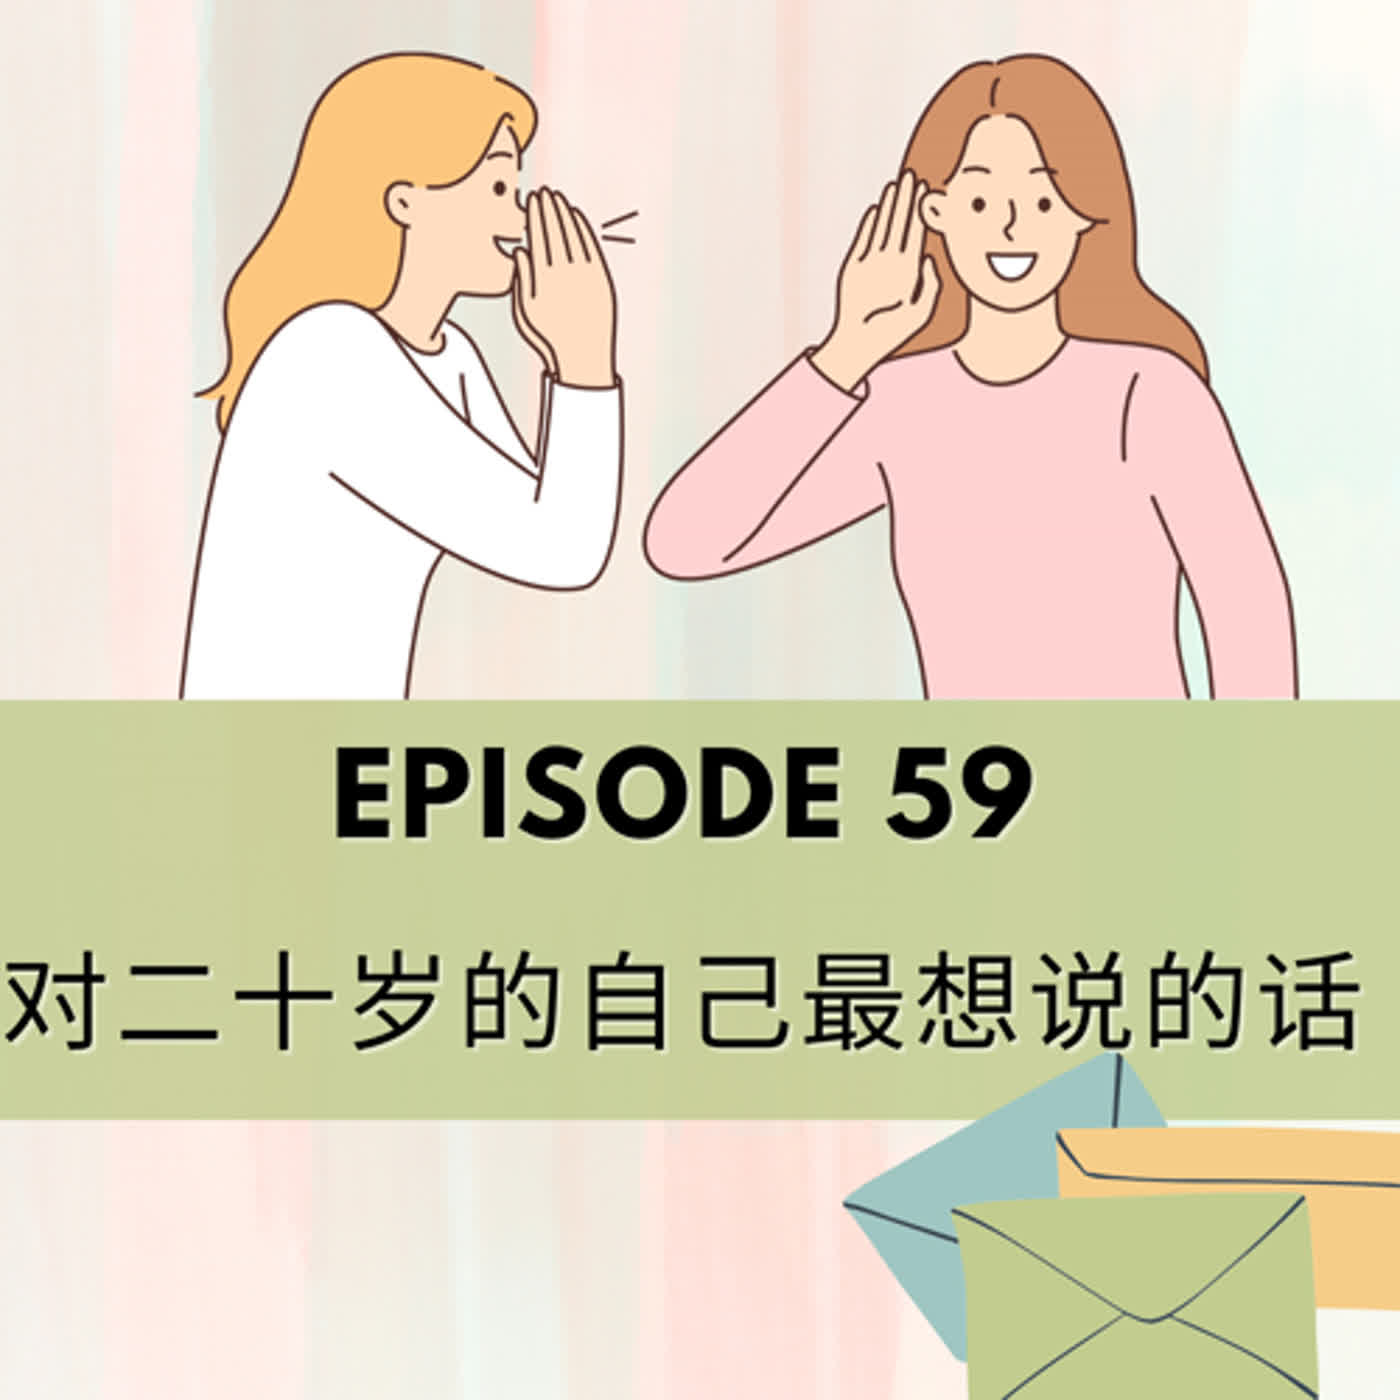 Episode 59 | 对二十岁的自己最想说的话　Things I would tell my 20 year old self